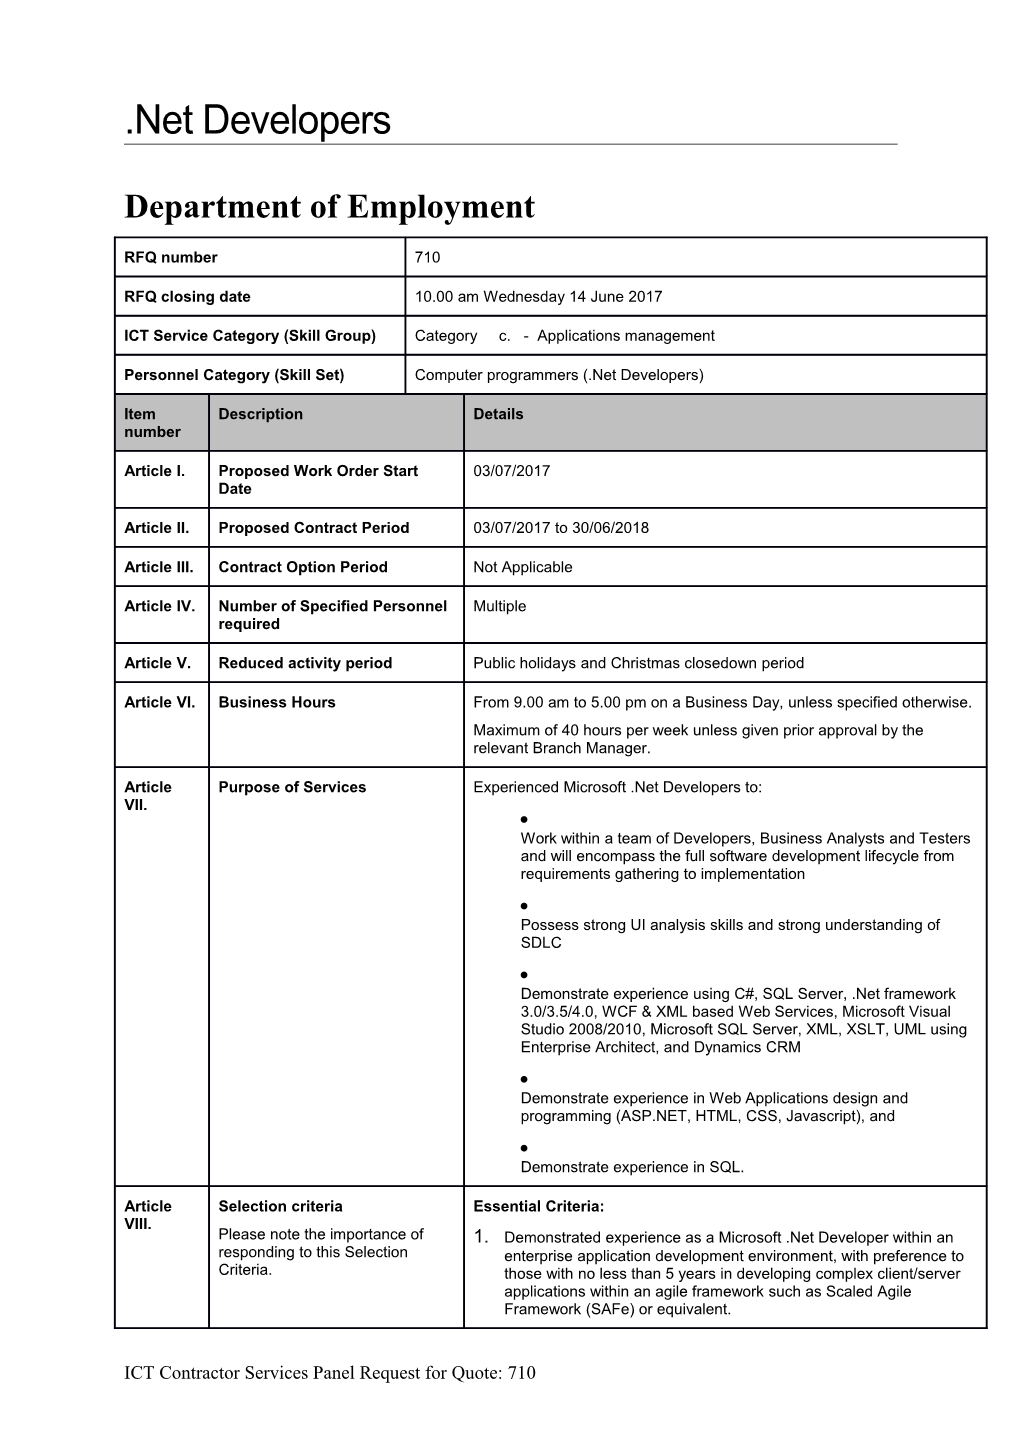 RFQ Template - Department of Employment